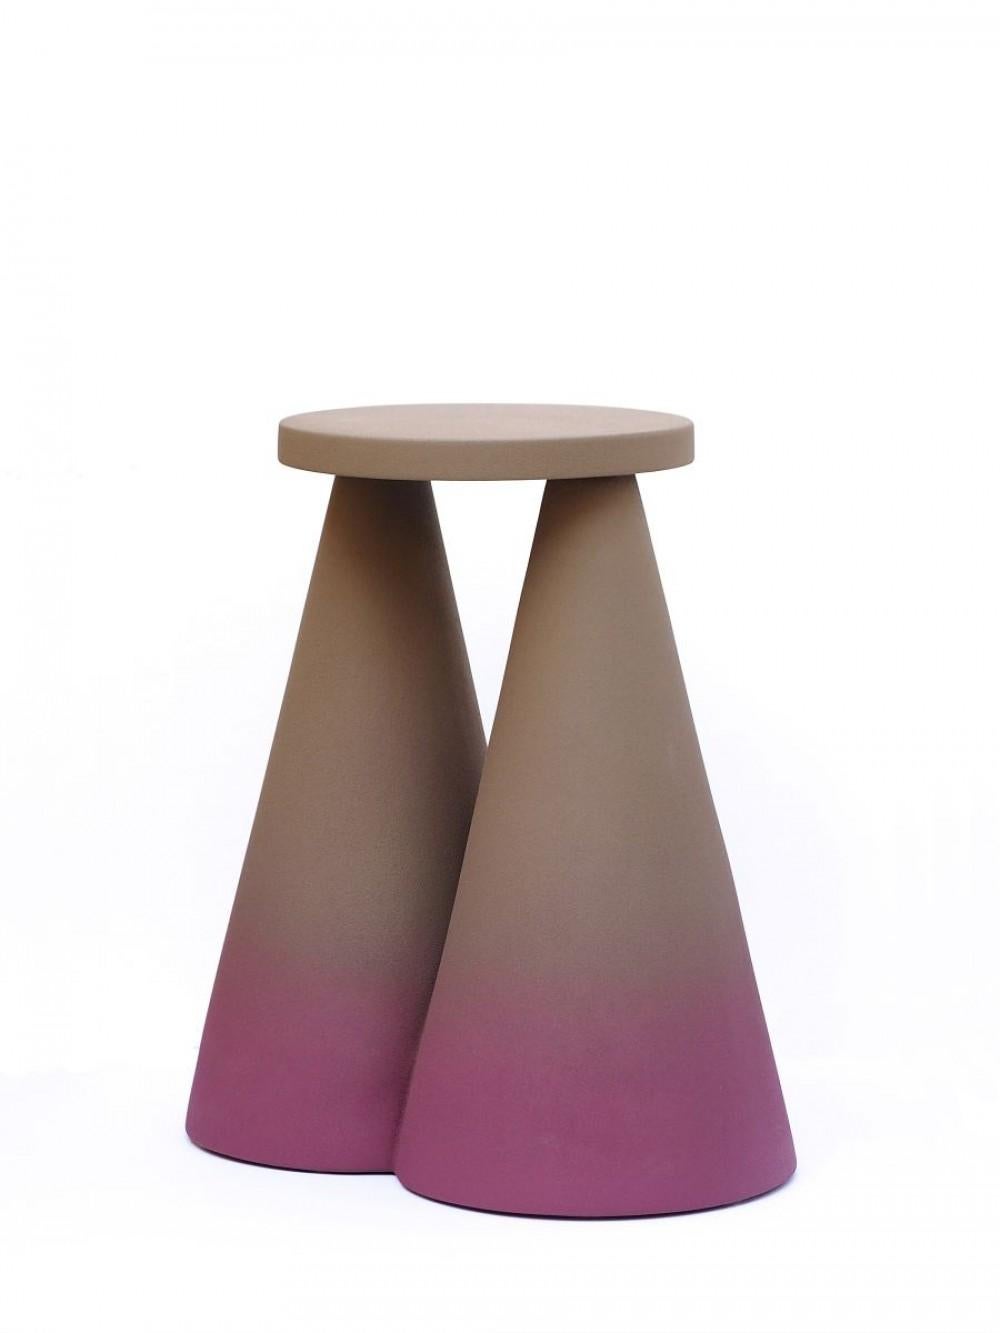 Isola side table by Cara Davide.
Dimensions: 25 x 43 x H 45 
Materials: ceramic / rough touch finishing.

Isola side table is completely made in ceramic using high temperature furnace, to make the material stronger. The large base makes the